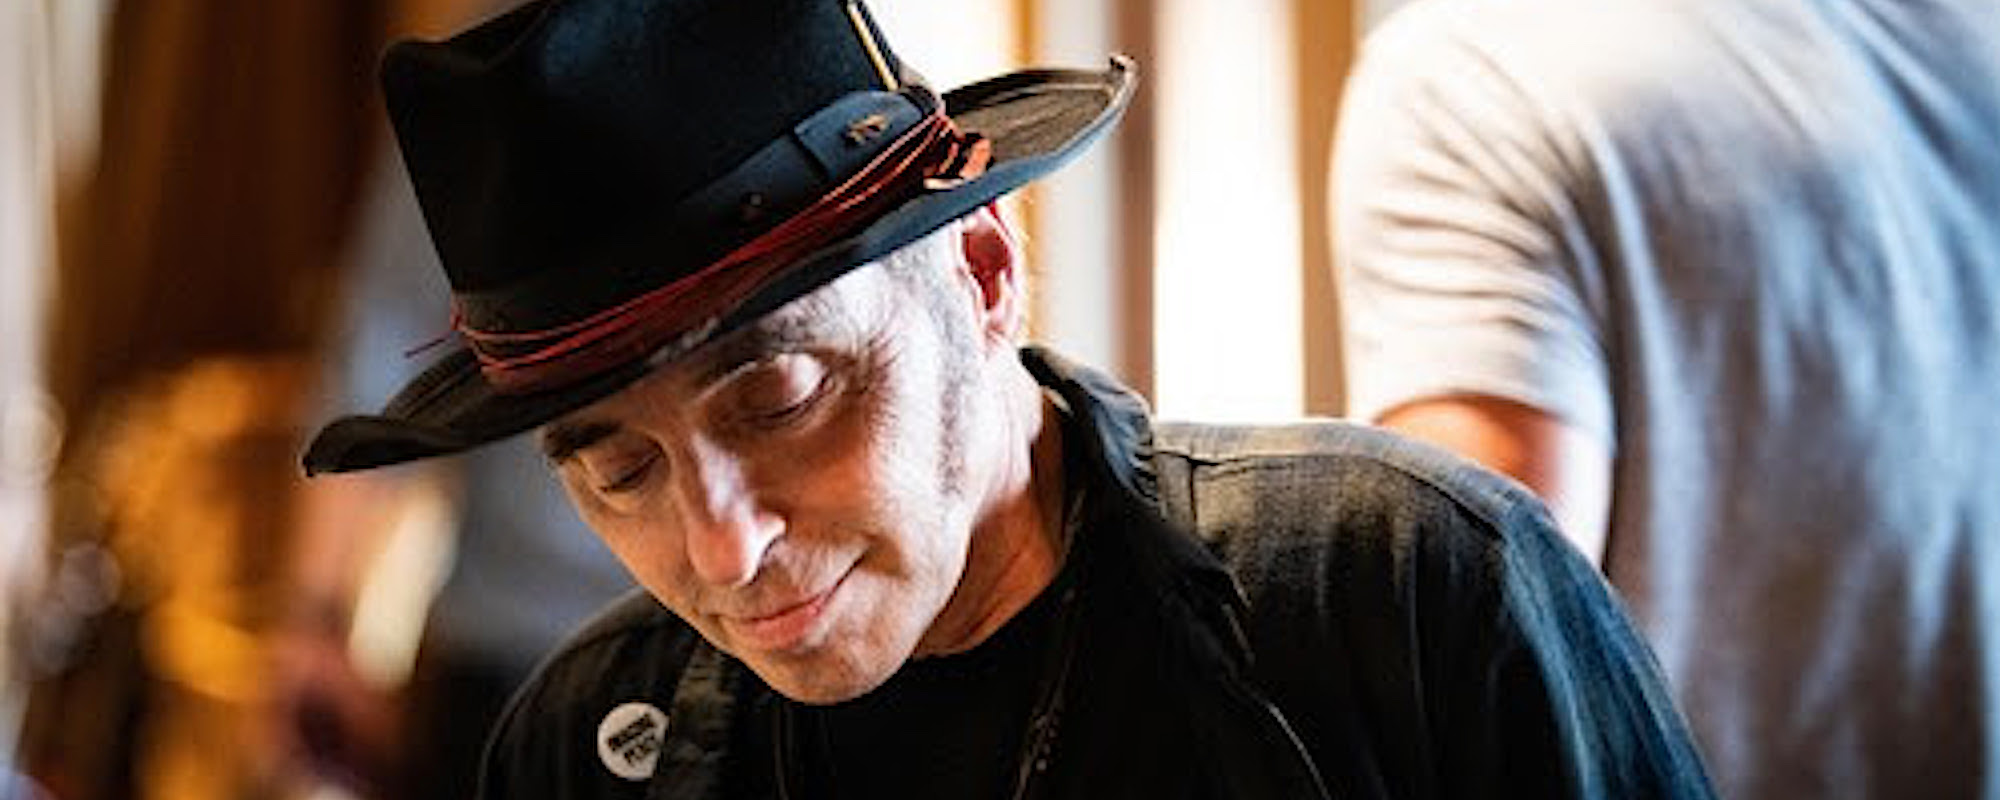 Nils Lofgren on the Freedom of Writing Solo and Moving ‘Mountains’